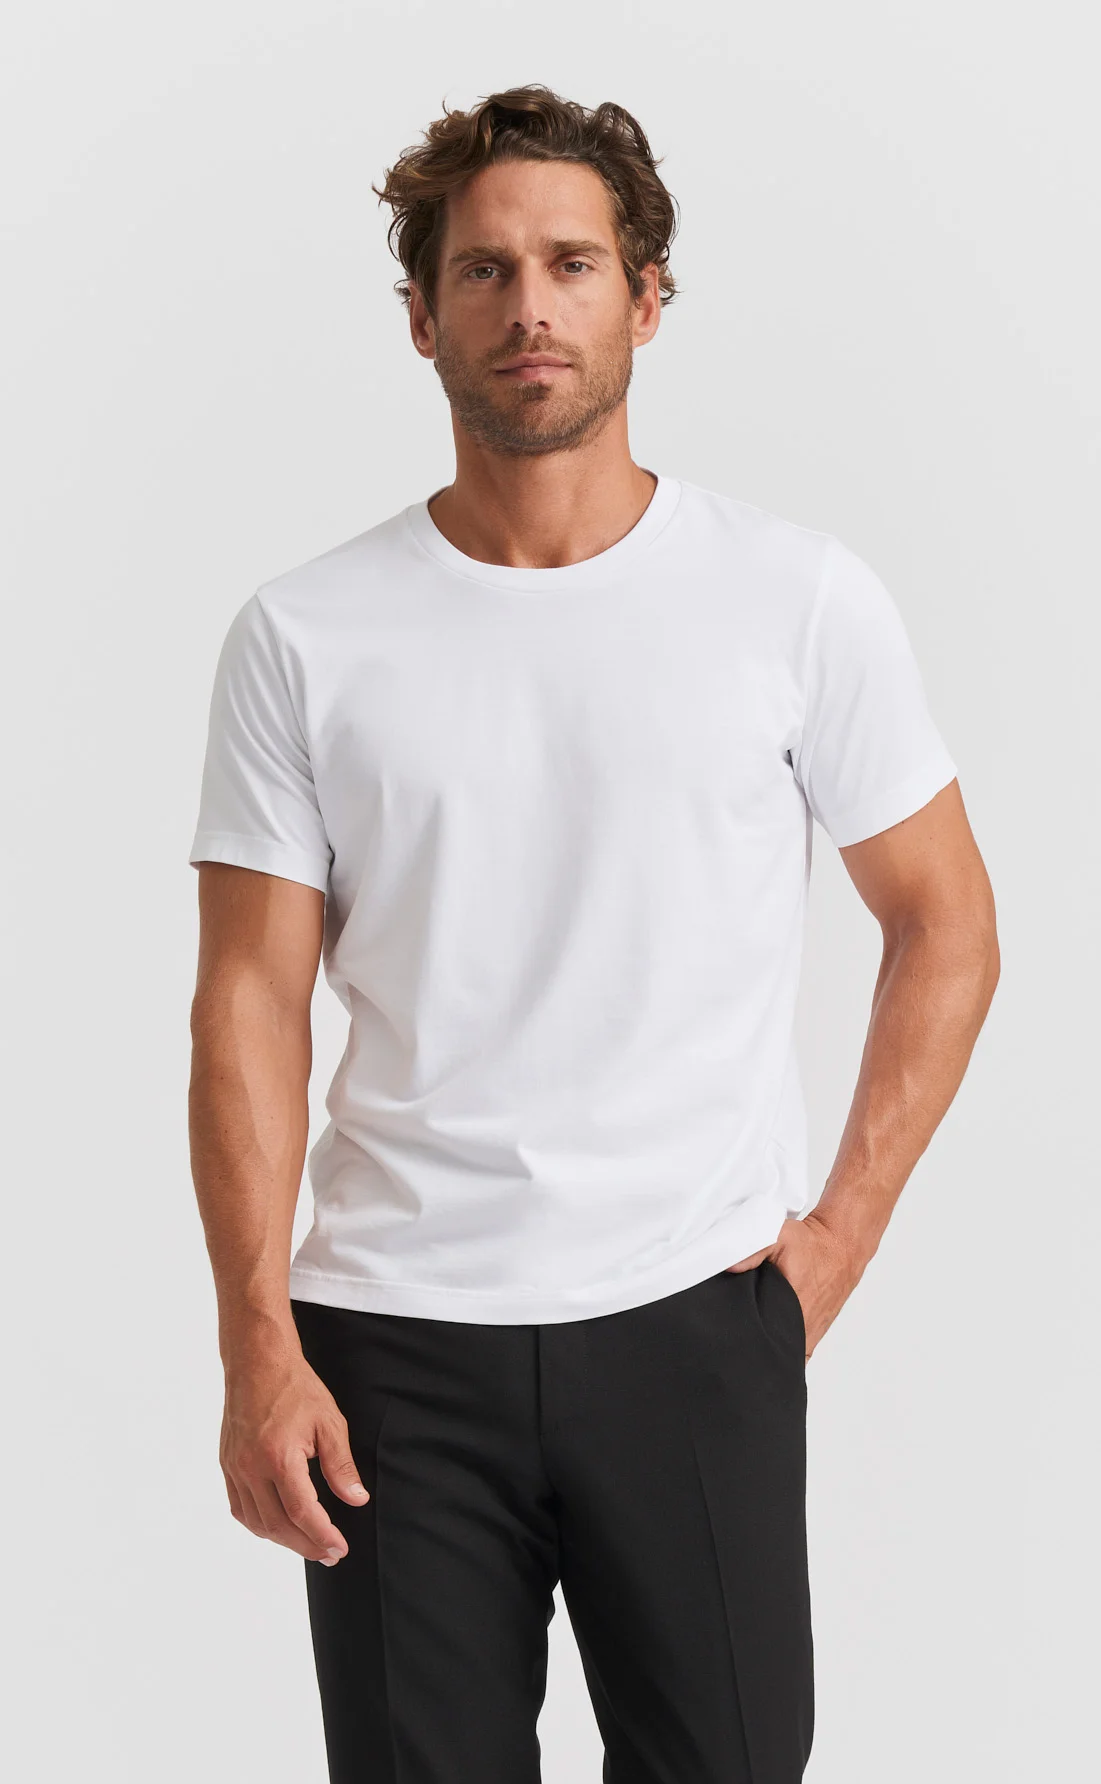 “Sustainable Style: Eco-Friendly T-Shirts for Conscious Consumers”